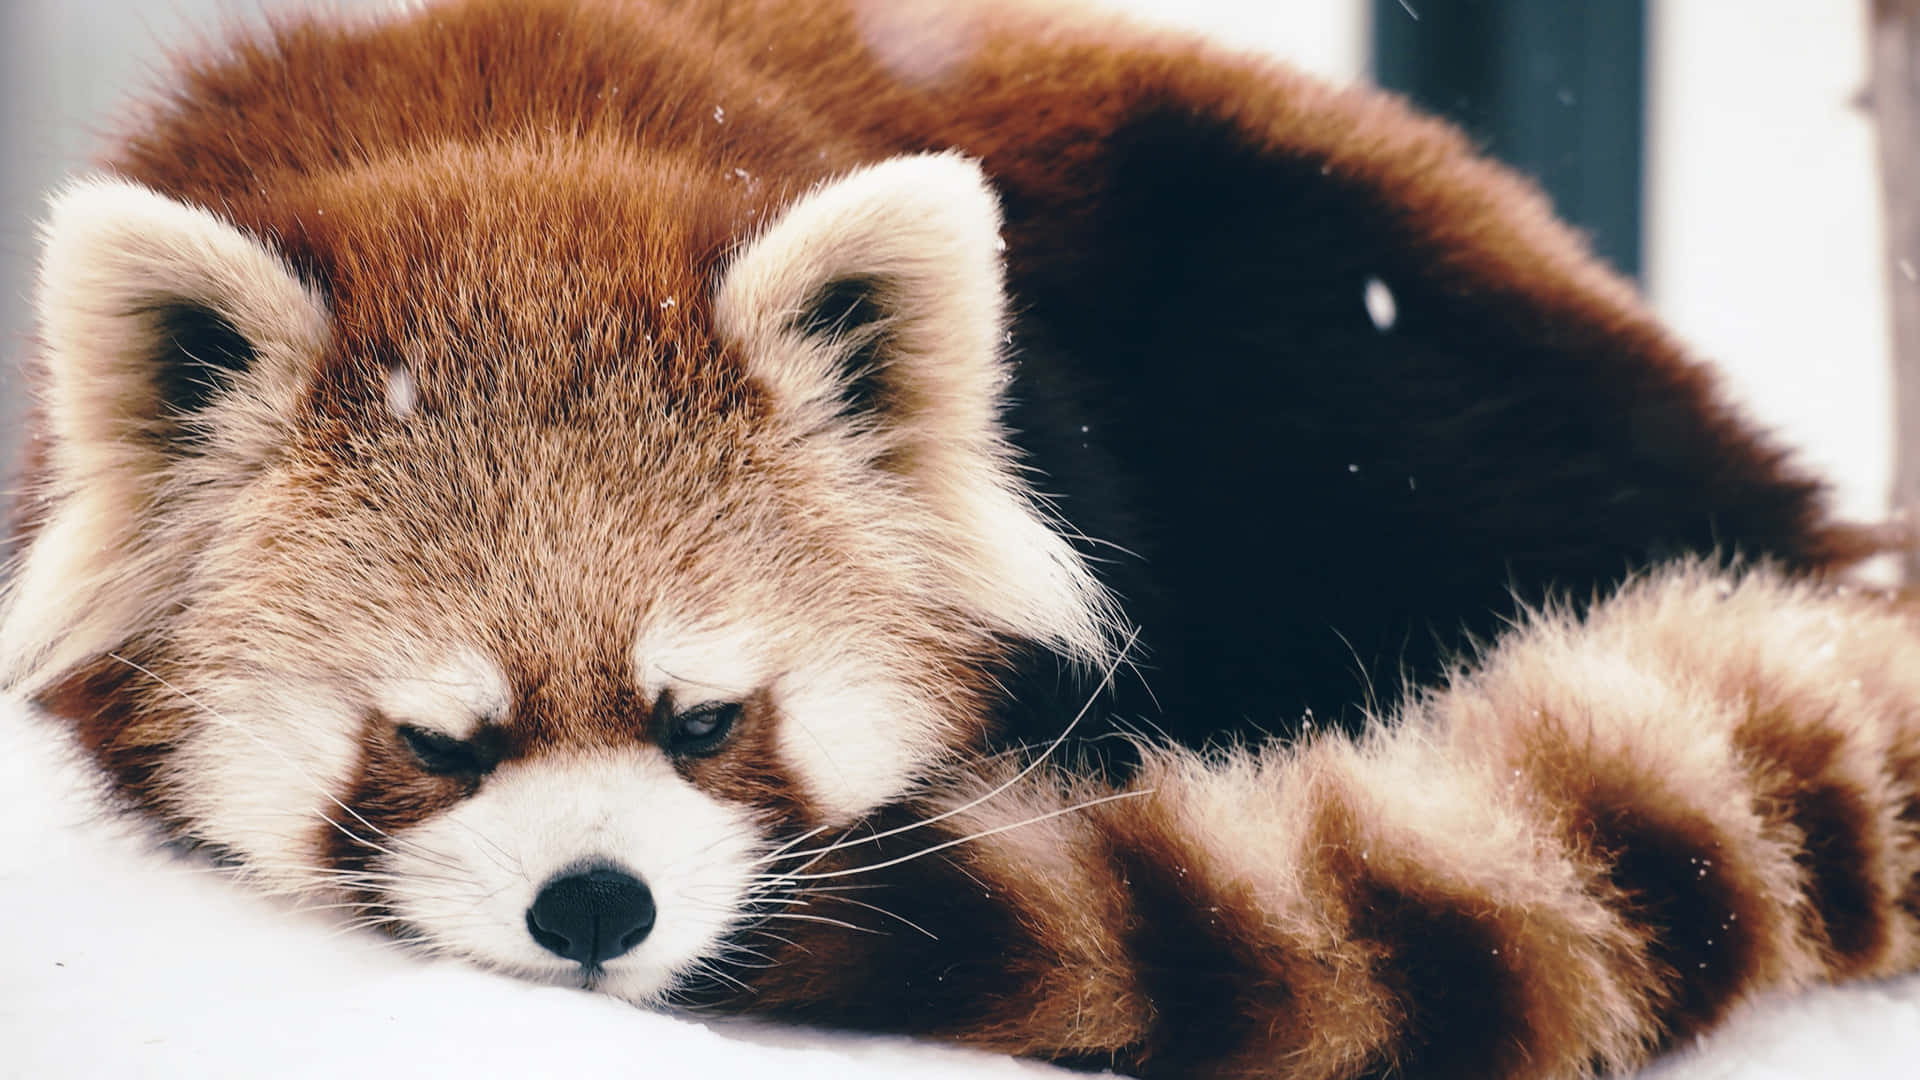 A red panda looks out over the snowy mountain ridges.